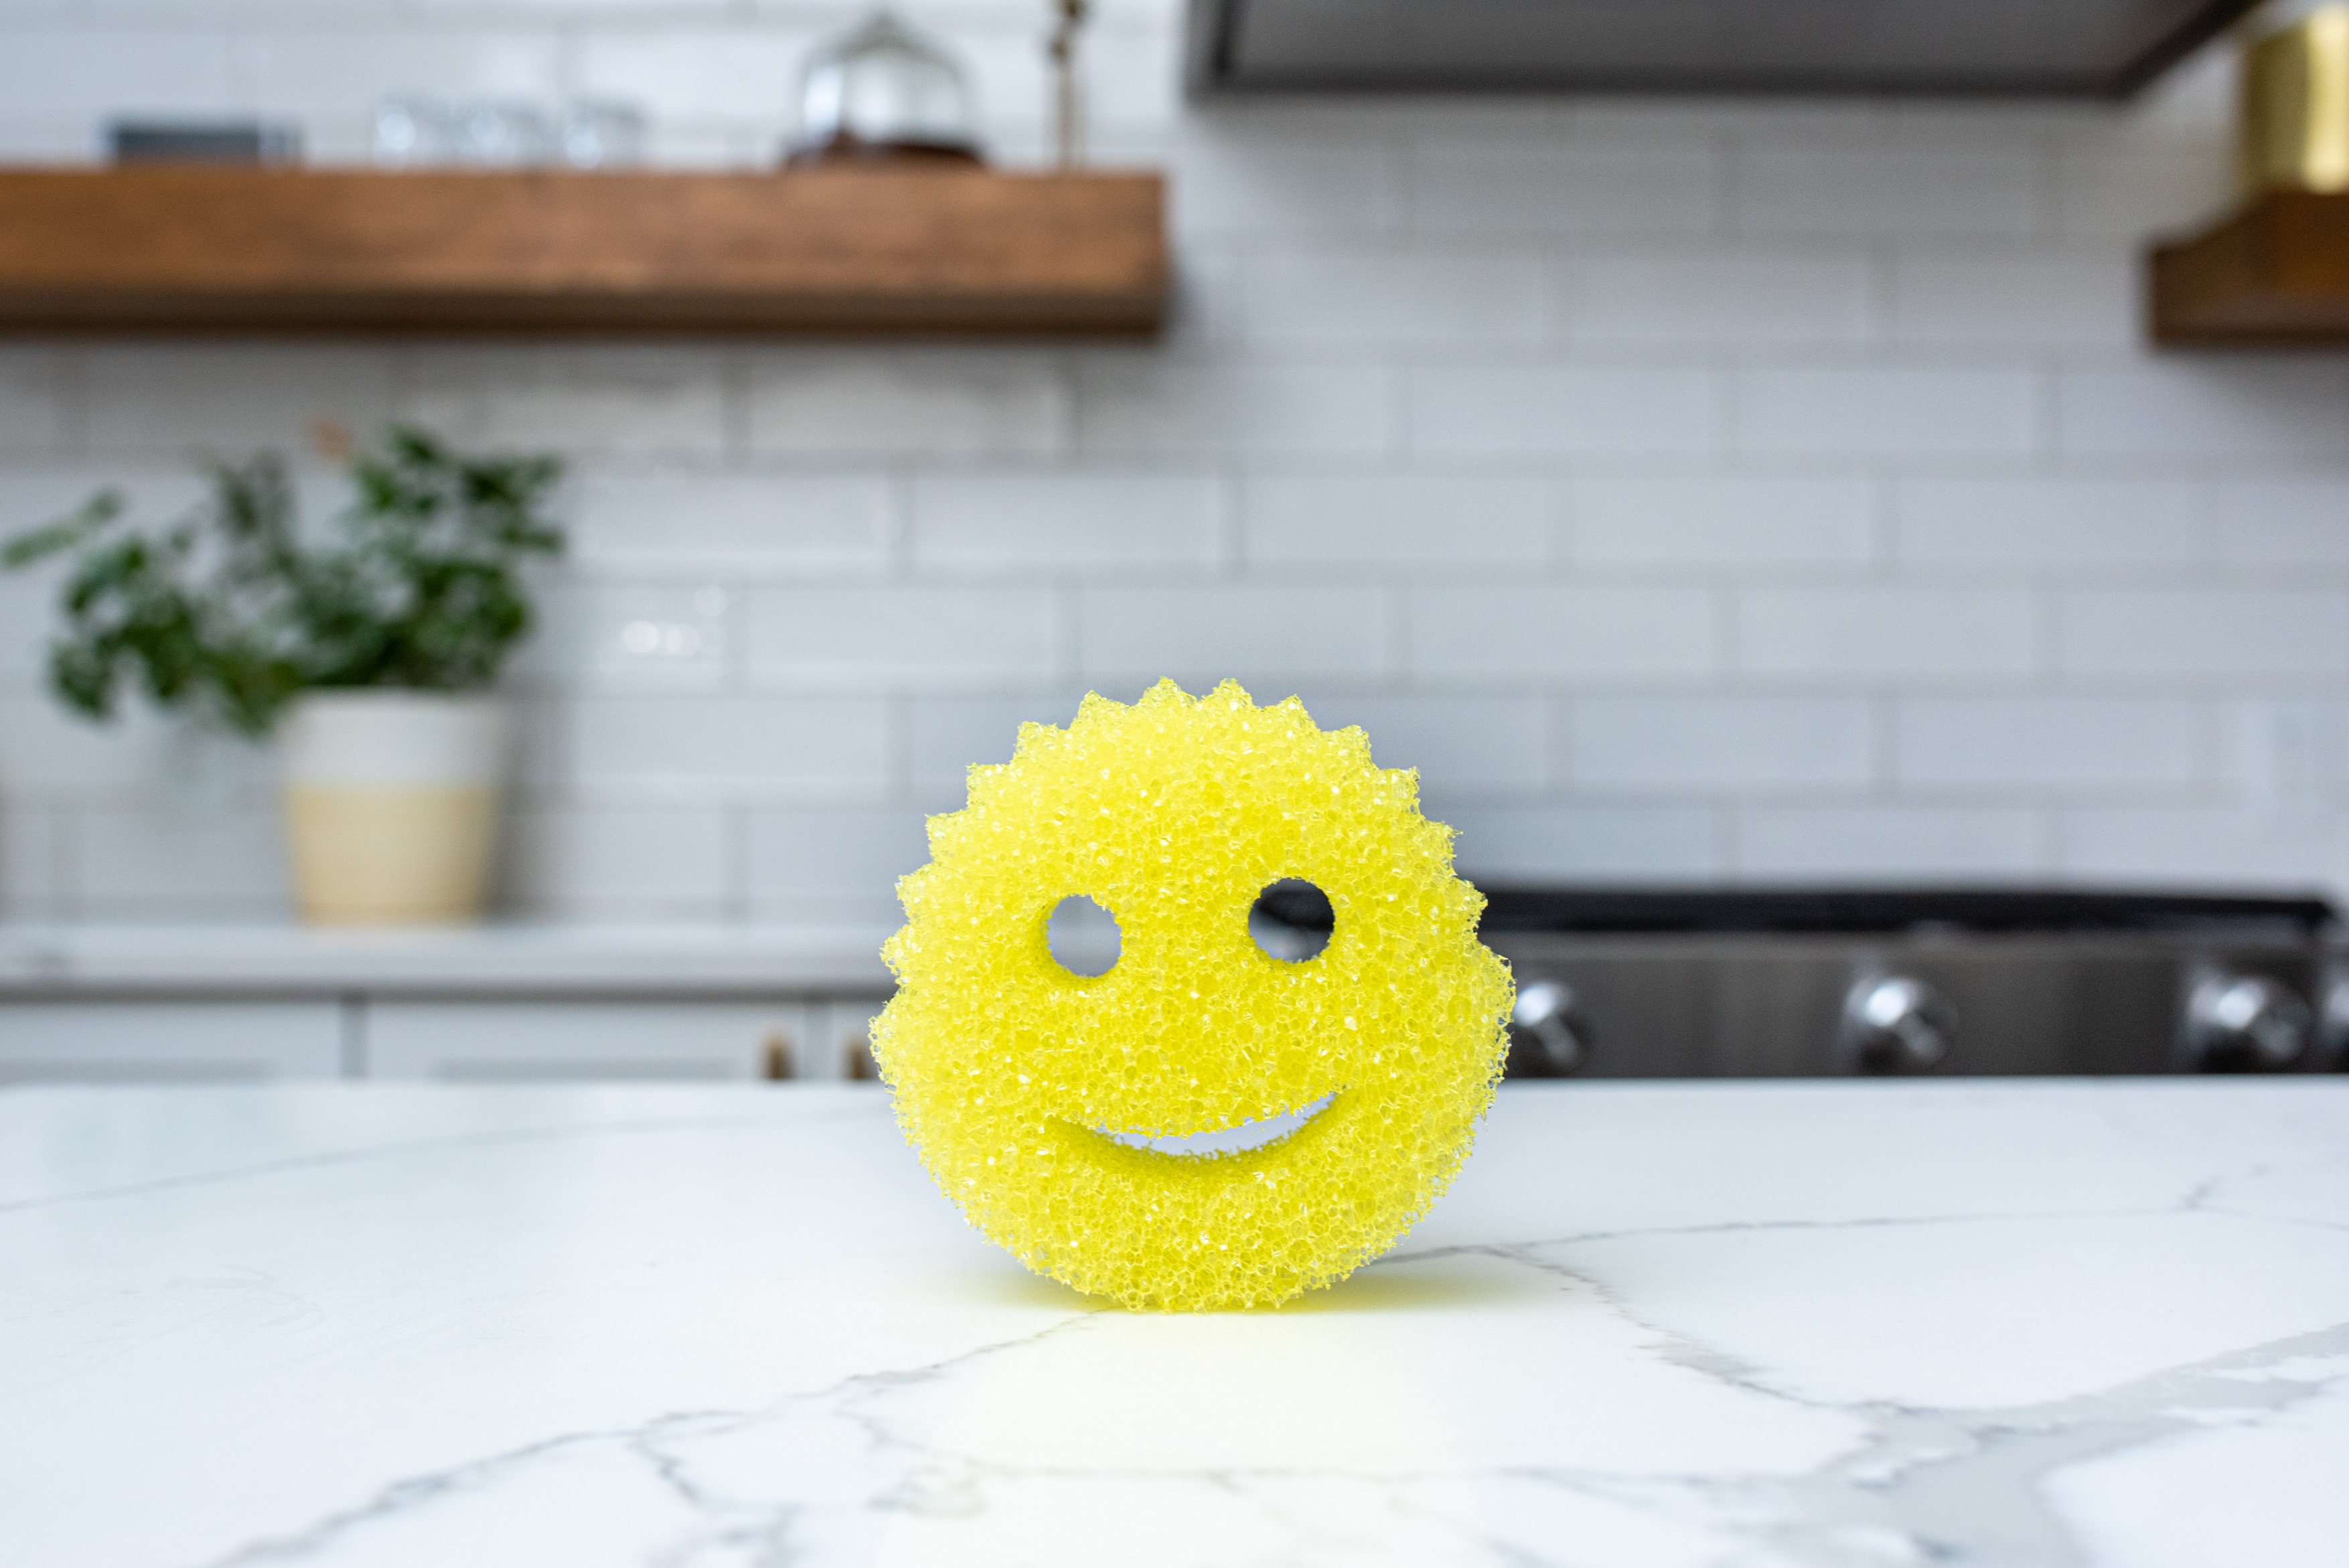 Scrub Daddy Colors (4ct Pack)